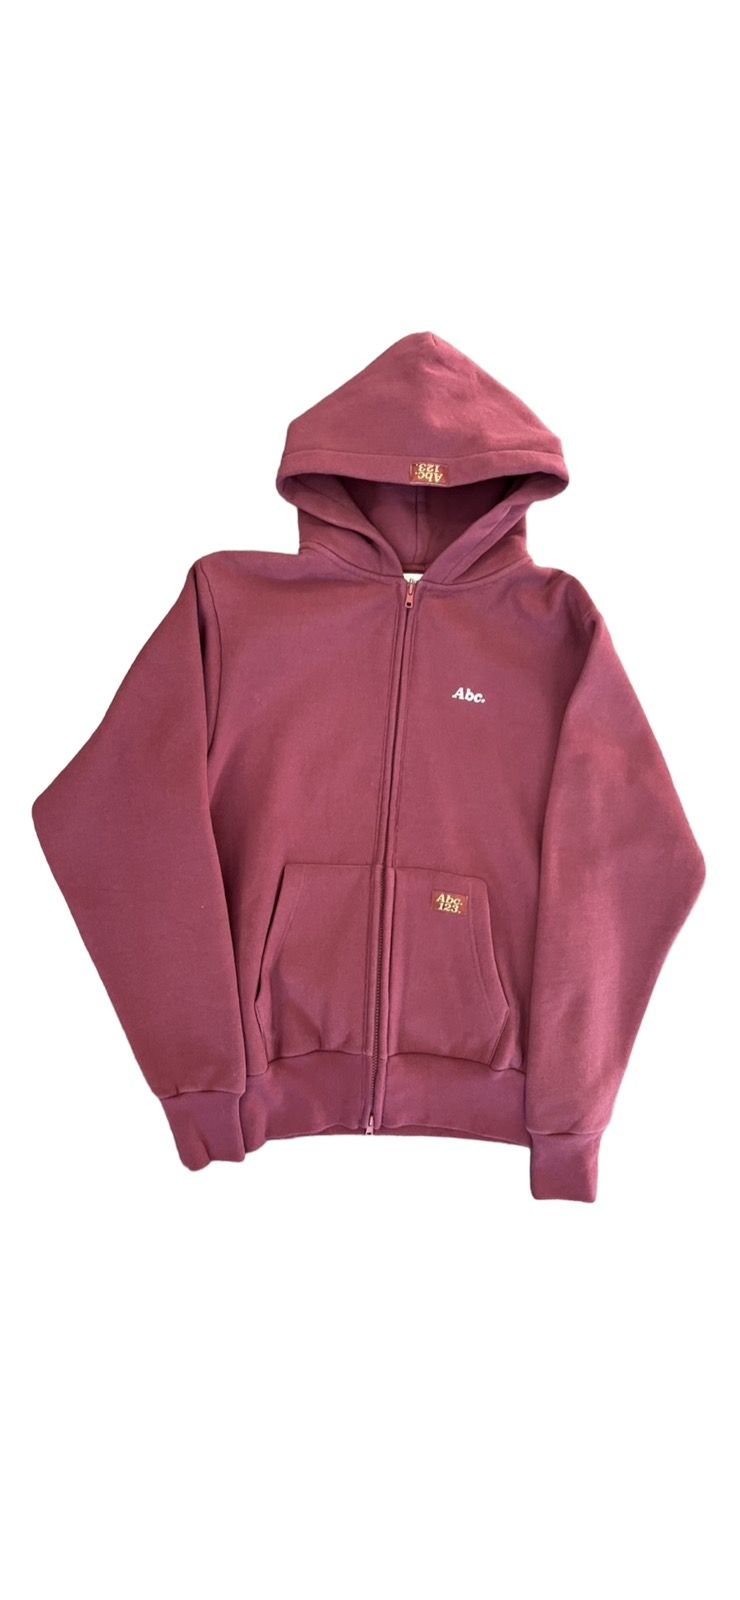 Pre-owned Advisory Board Crystals Abc Zip Up Hoodie Maroon Small